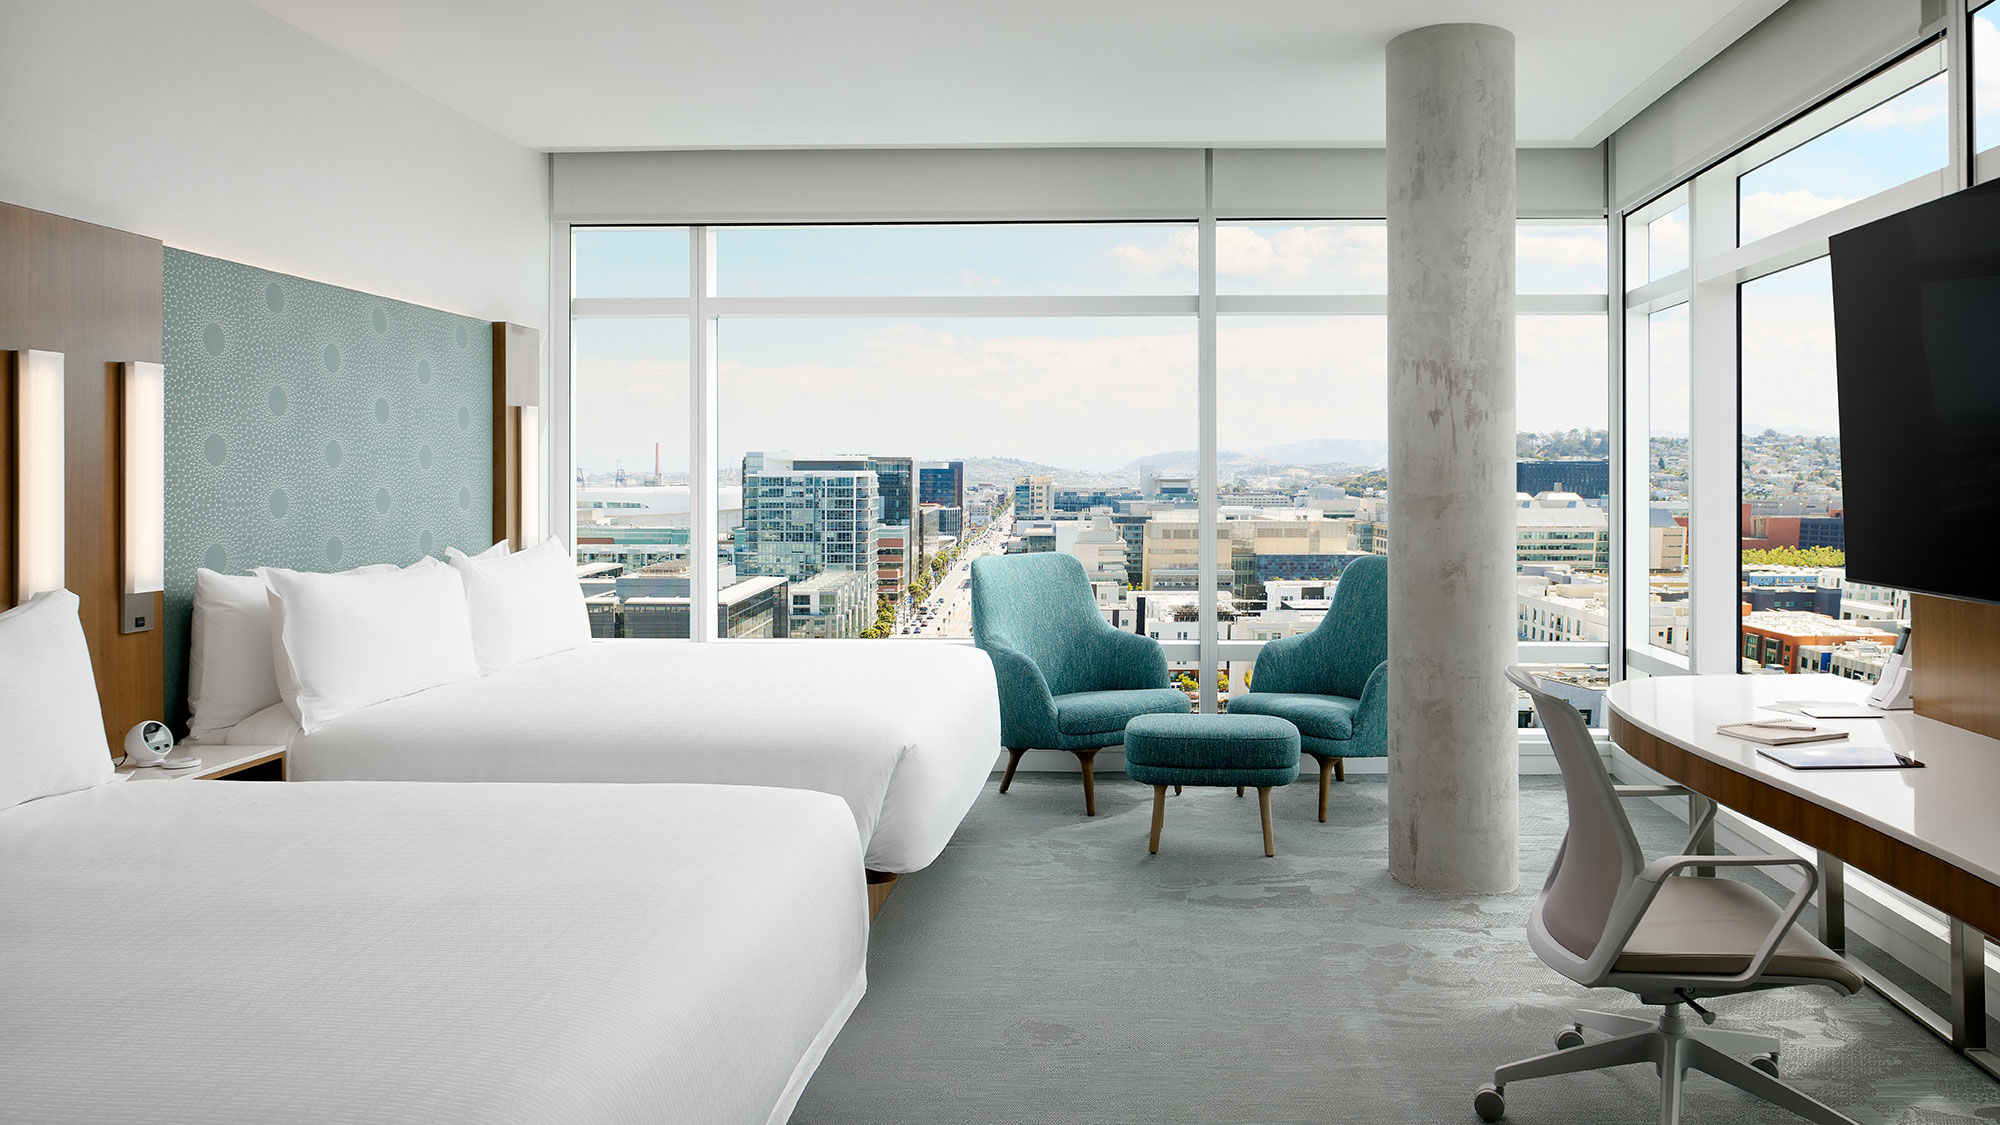 A King Premier room, one of 299 units at the Luma Hotel San Francisco, the Mission Bay district's first property.